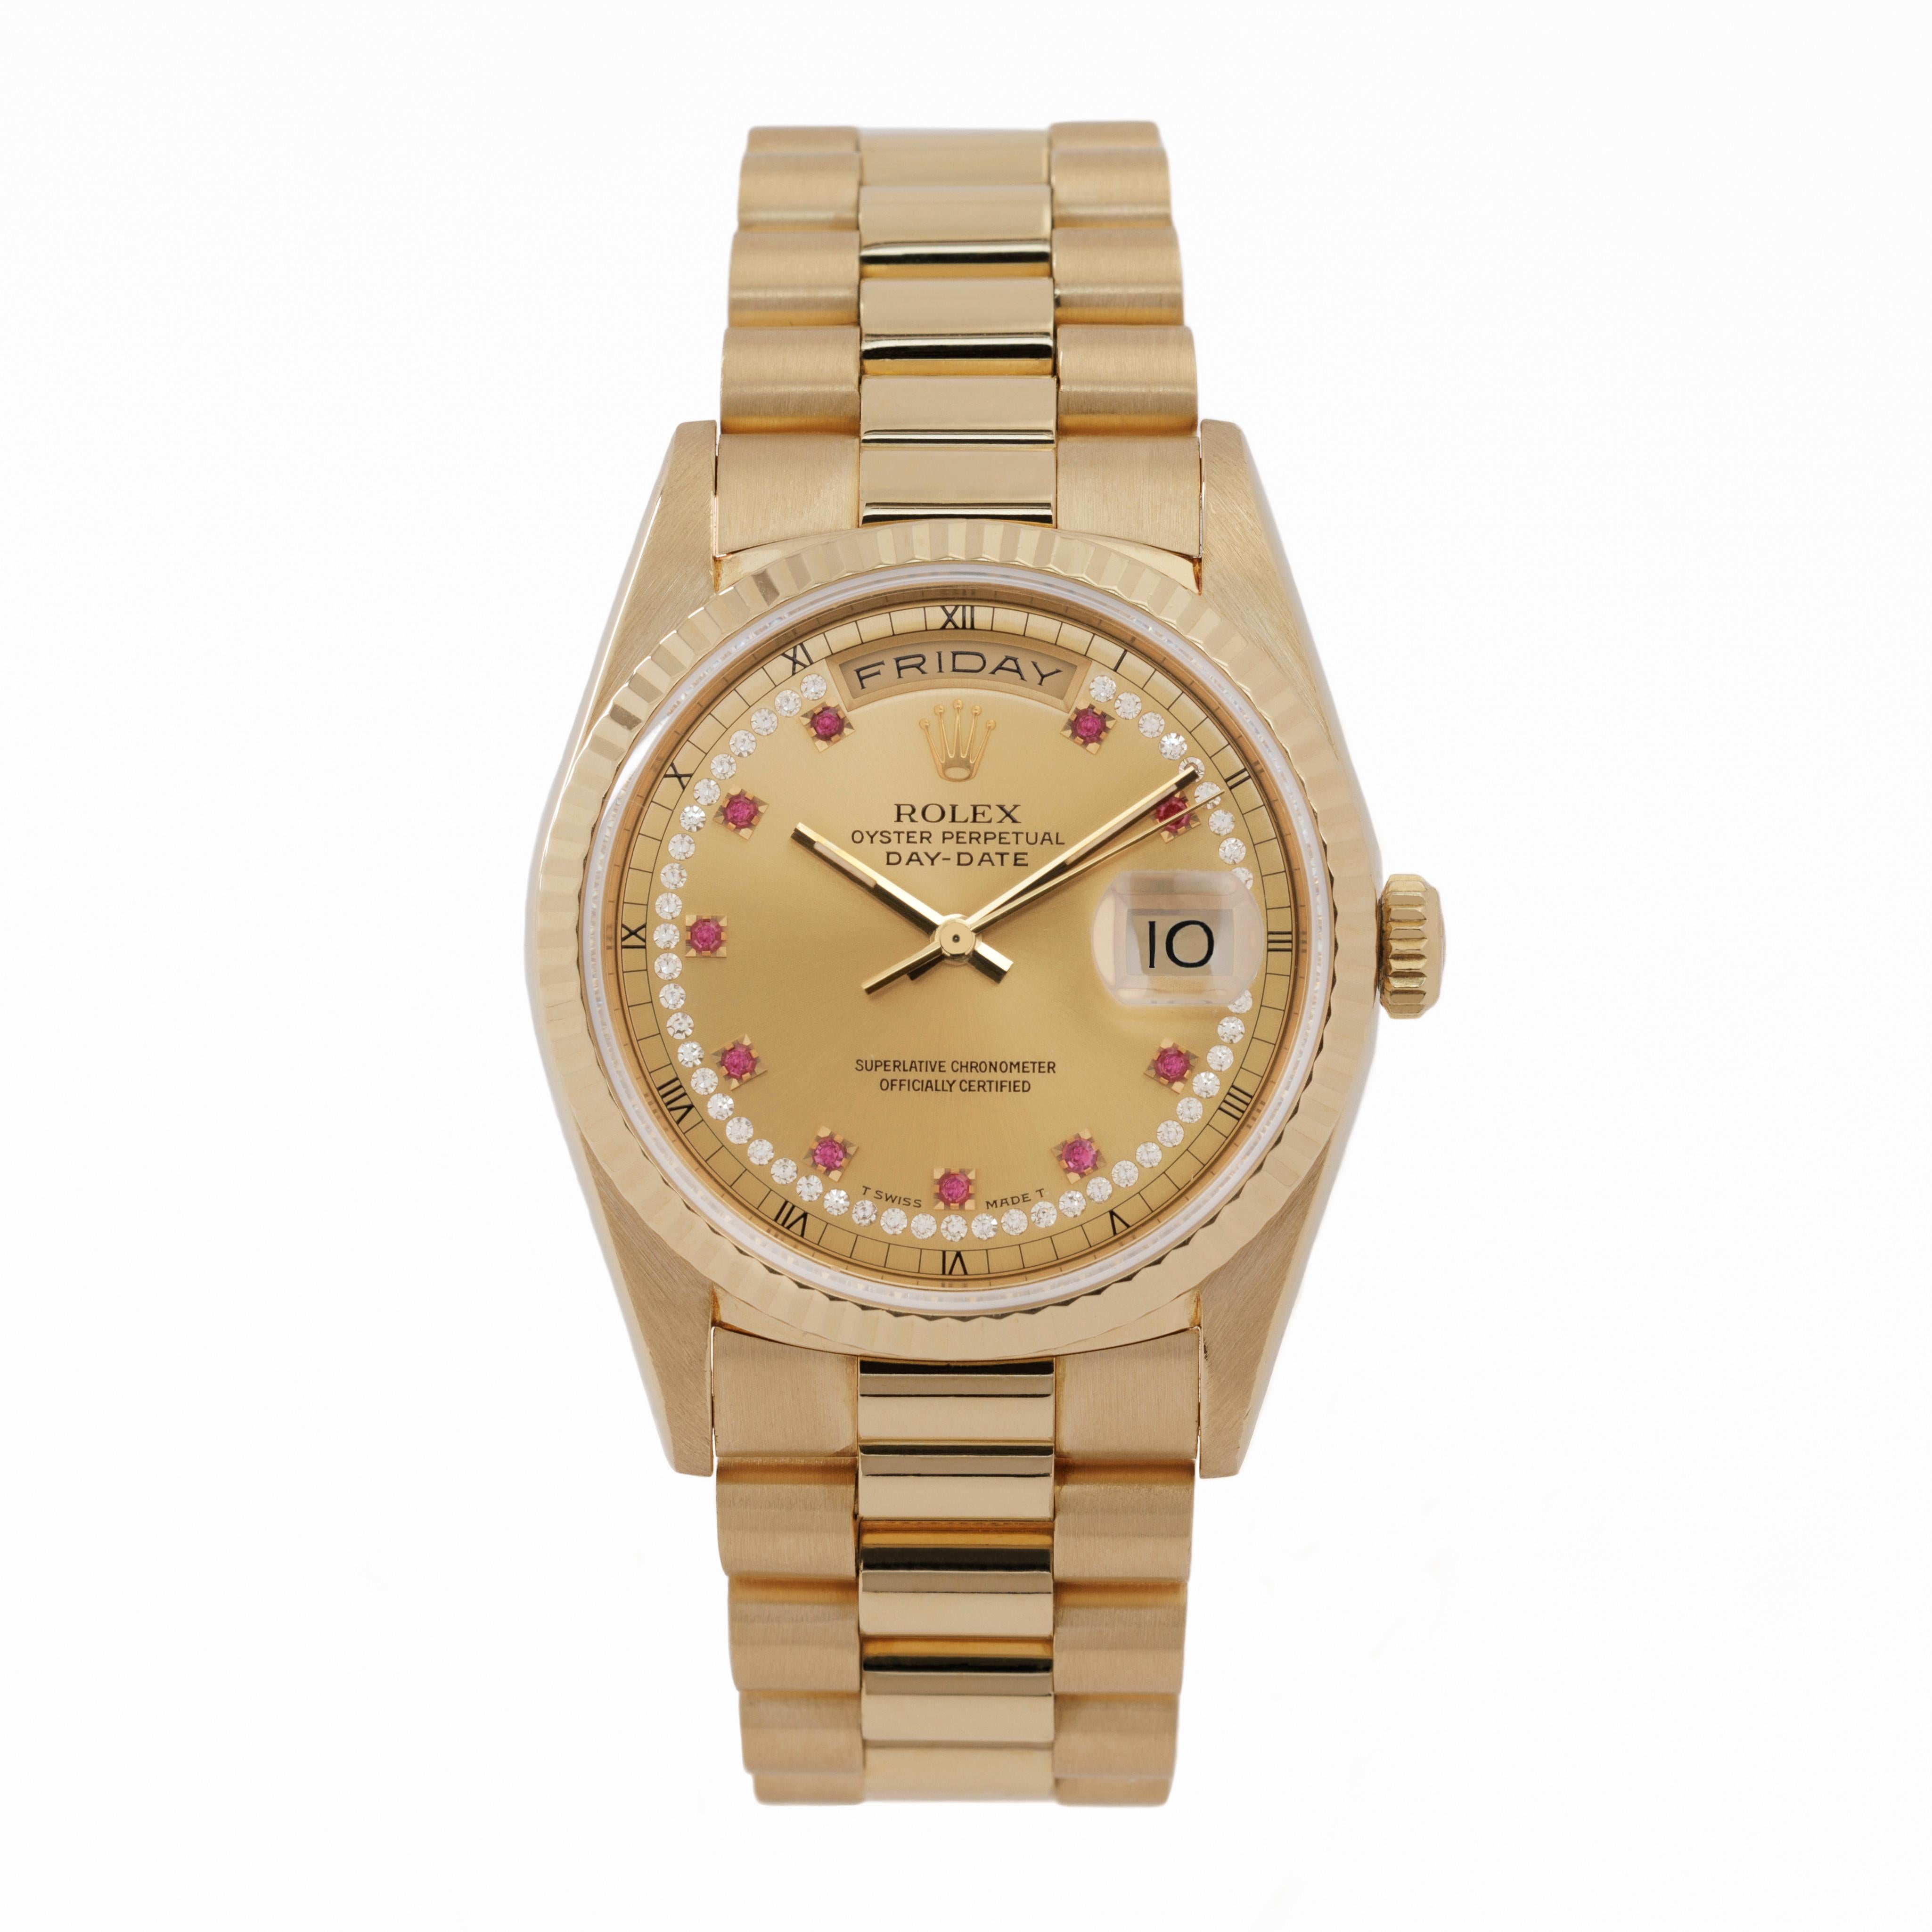 1999 Rolex Day-Date President 18 Karat Yellow Gold and Ruby and Diamond String 36mm Dial with Original Box & Papers
Model 18238
c.1999

The 1999 Rolex Day-Date President is the crown jewel of the Rolex catalog. Debuting in 1956, the Day-Date is the